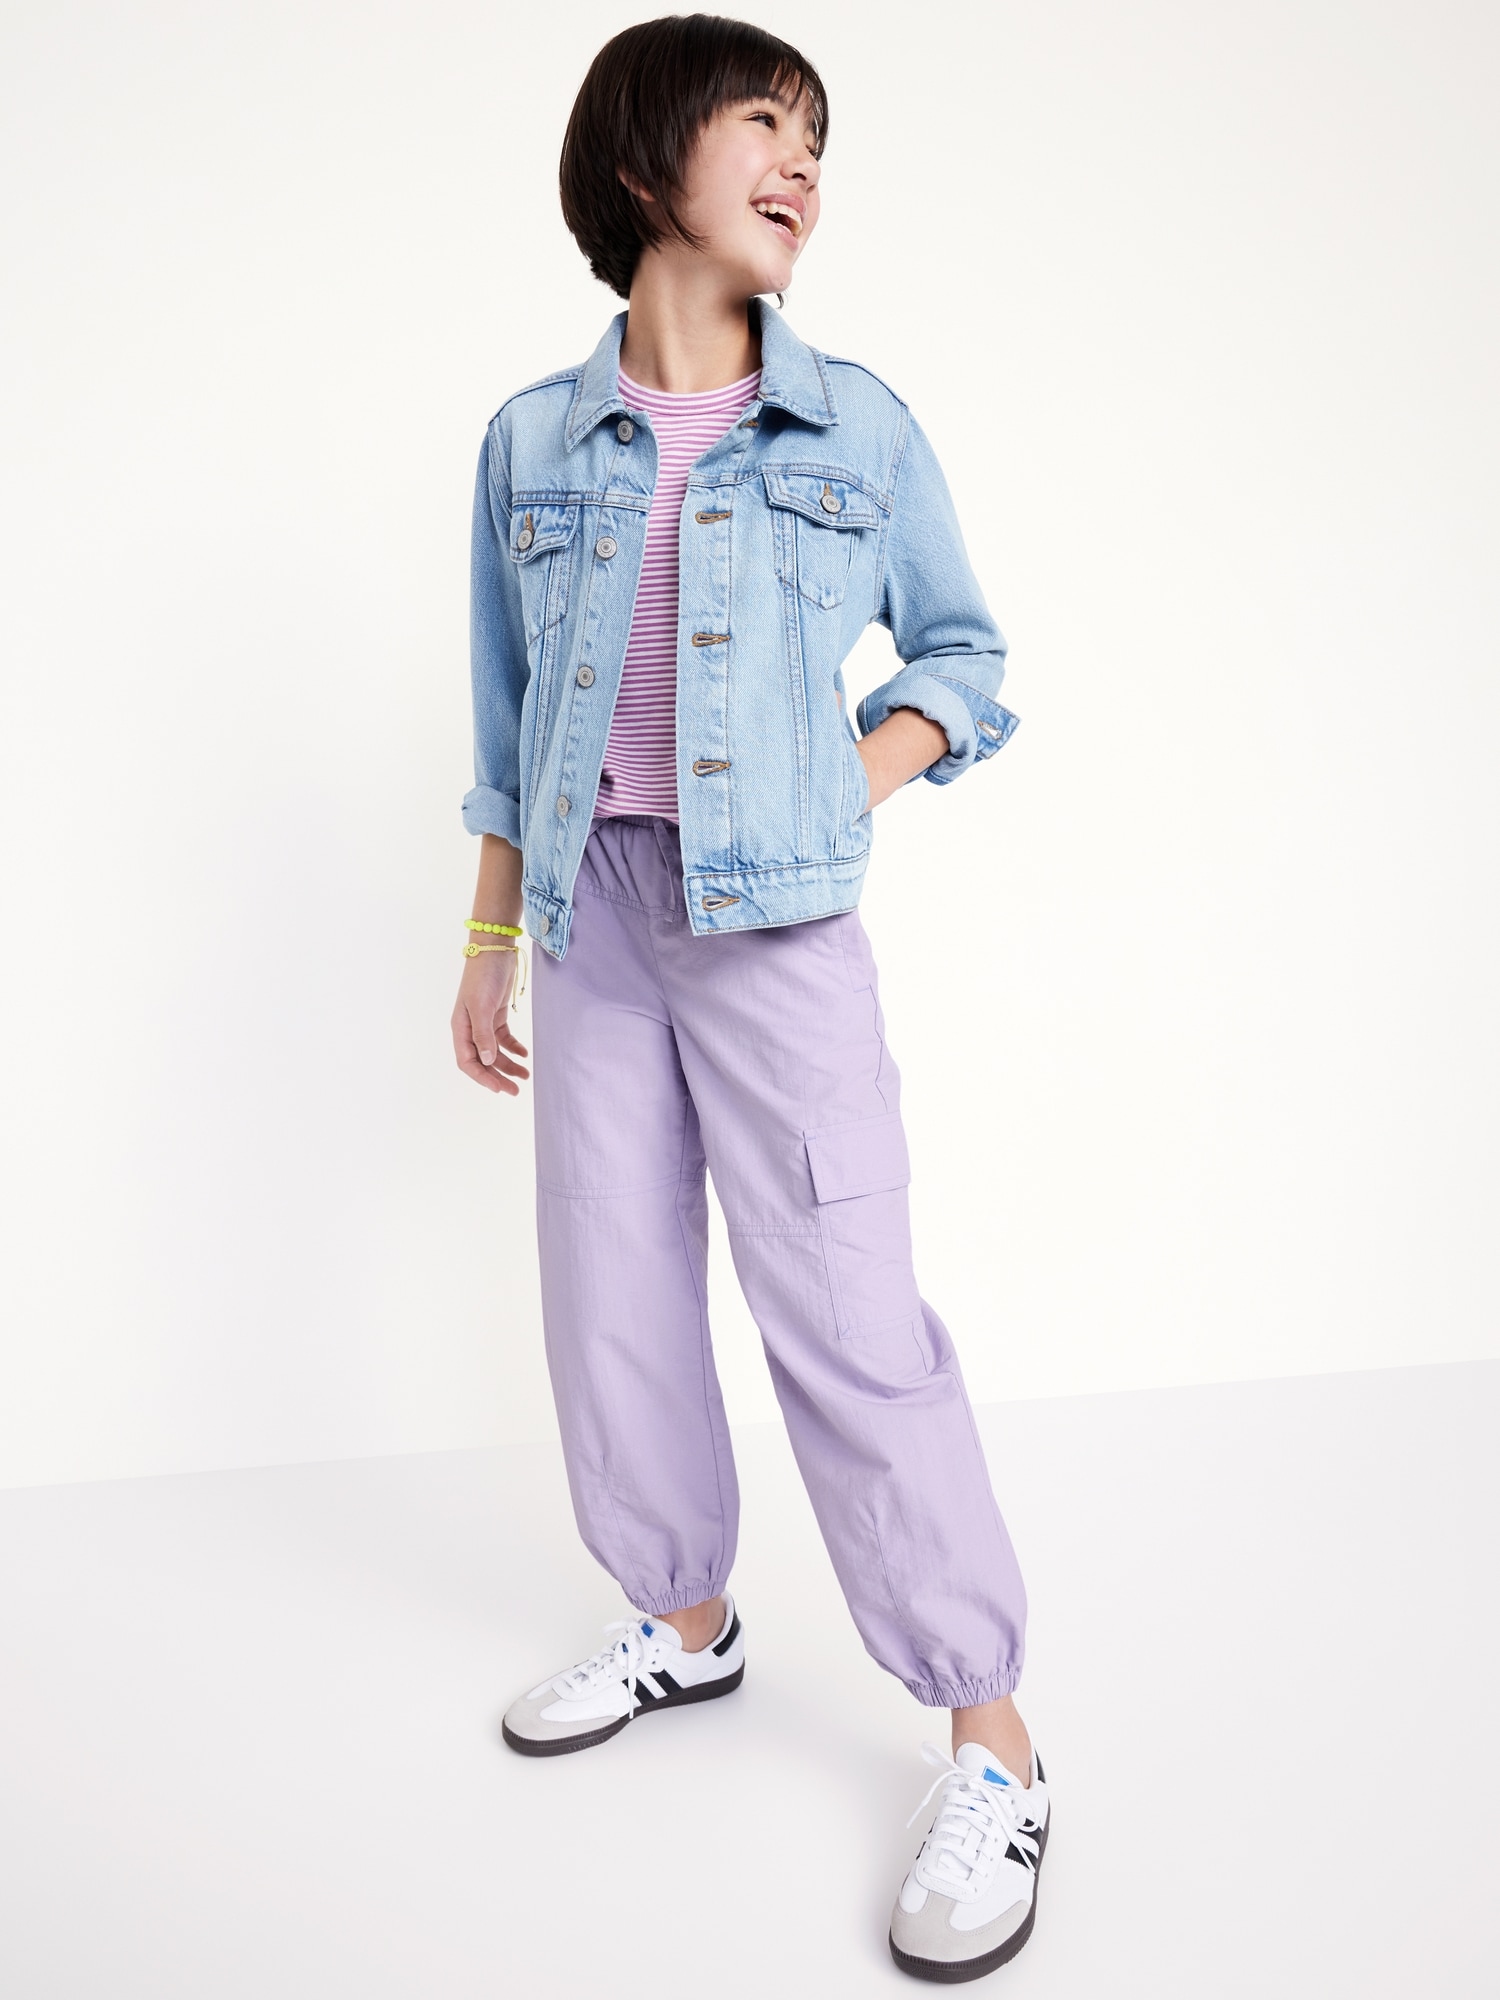 High-Waisted Cargo Performance Pants for Girls